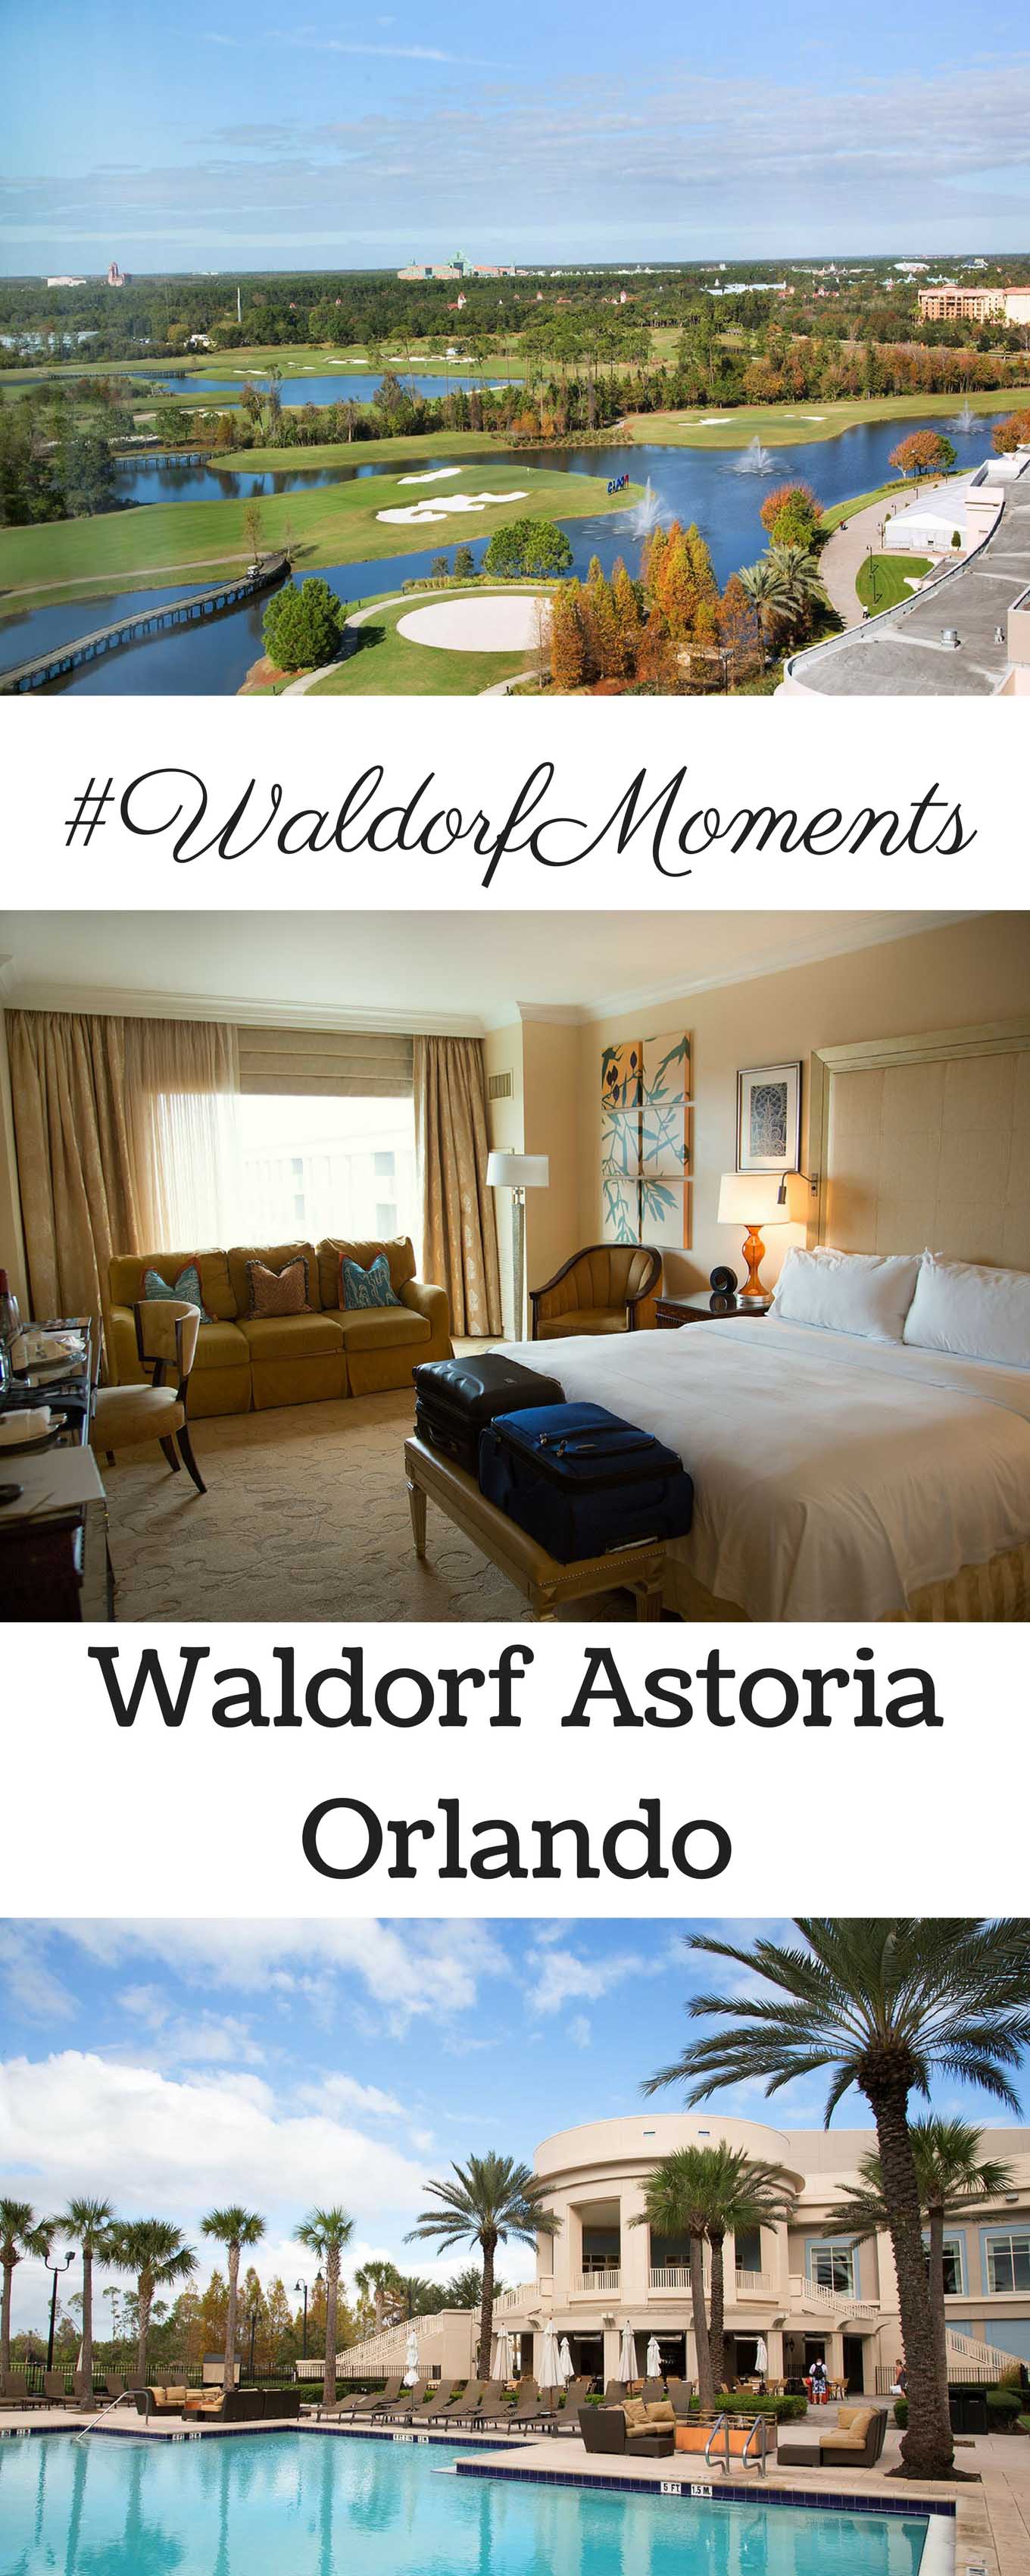 Your stay at the Waldorf Astoria Orlando will be filled with one delicious #WaldorfMoment after another! 